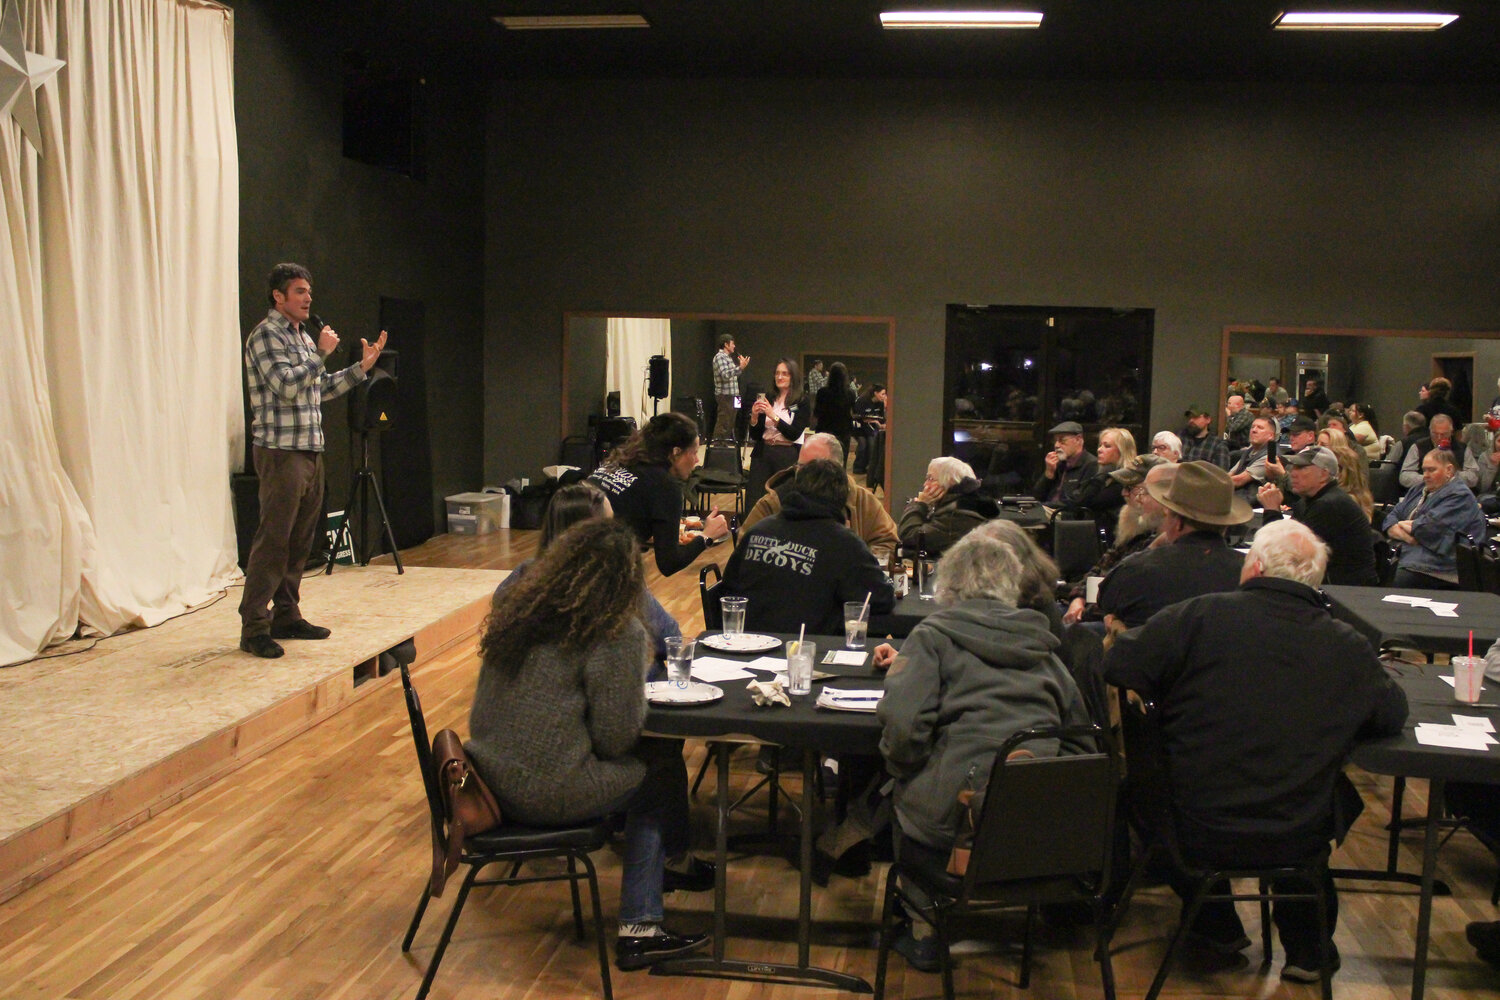 Joe Kent speaks to a crowd of approximately 50 attendees at Mr. Dougs on Feb. 8.